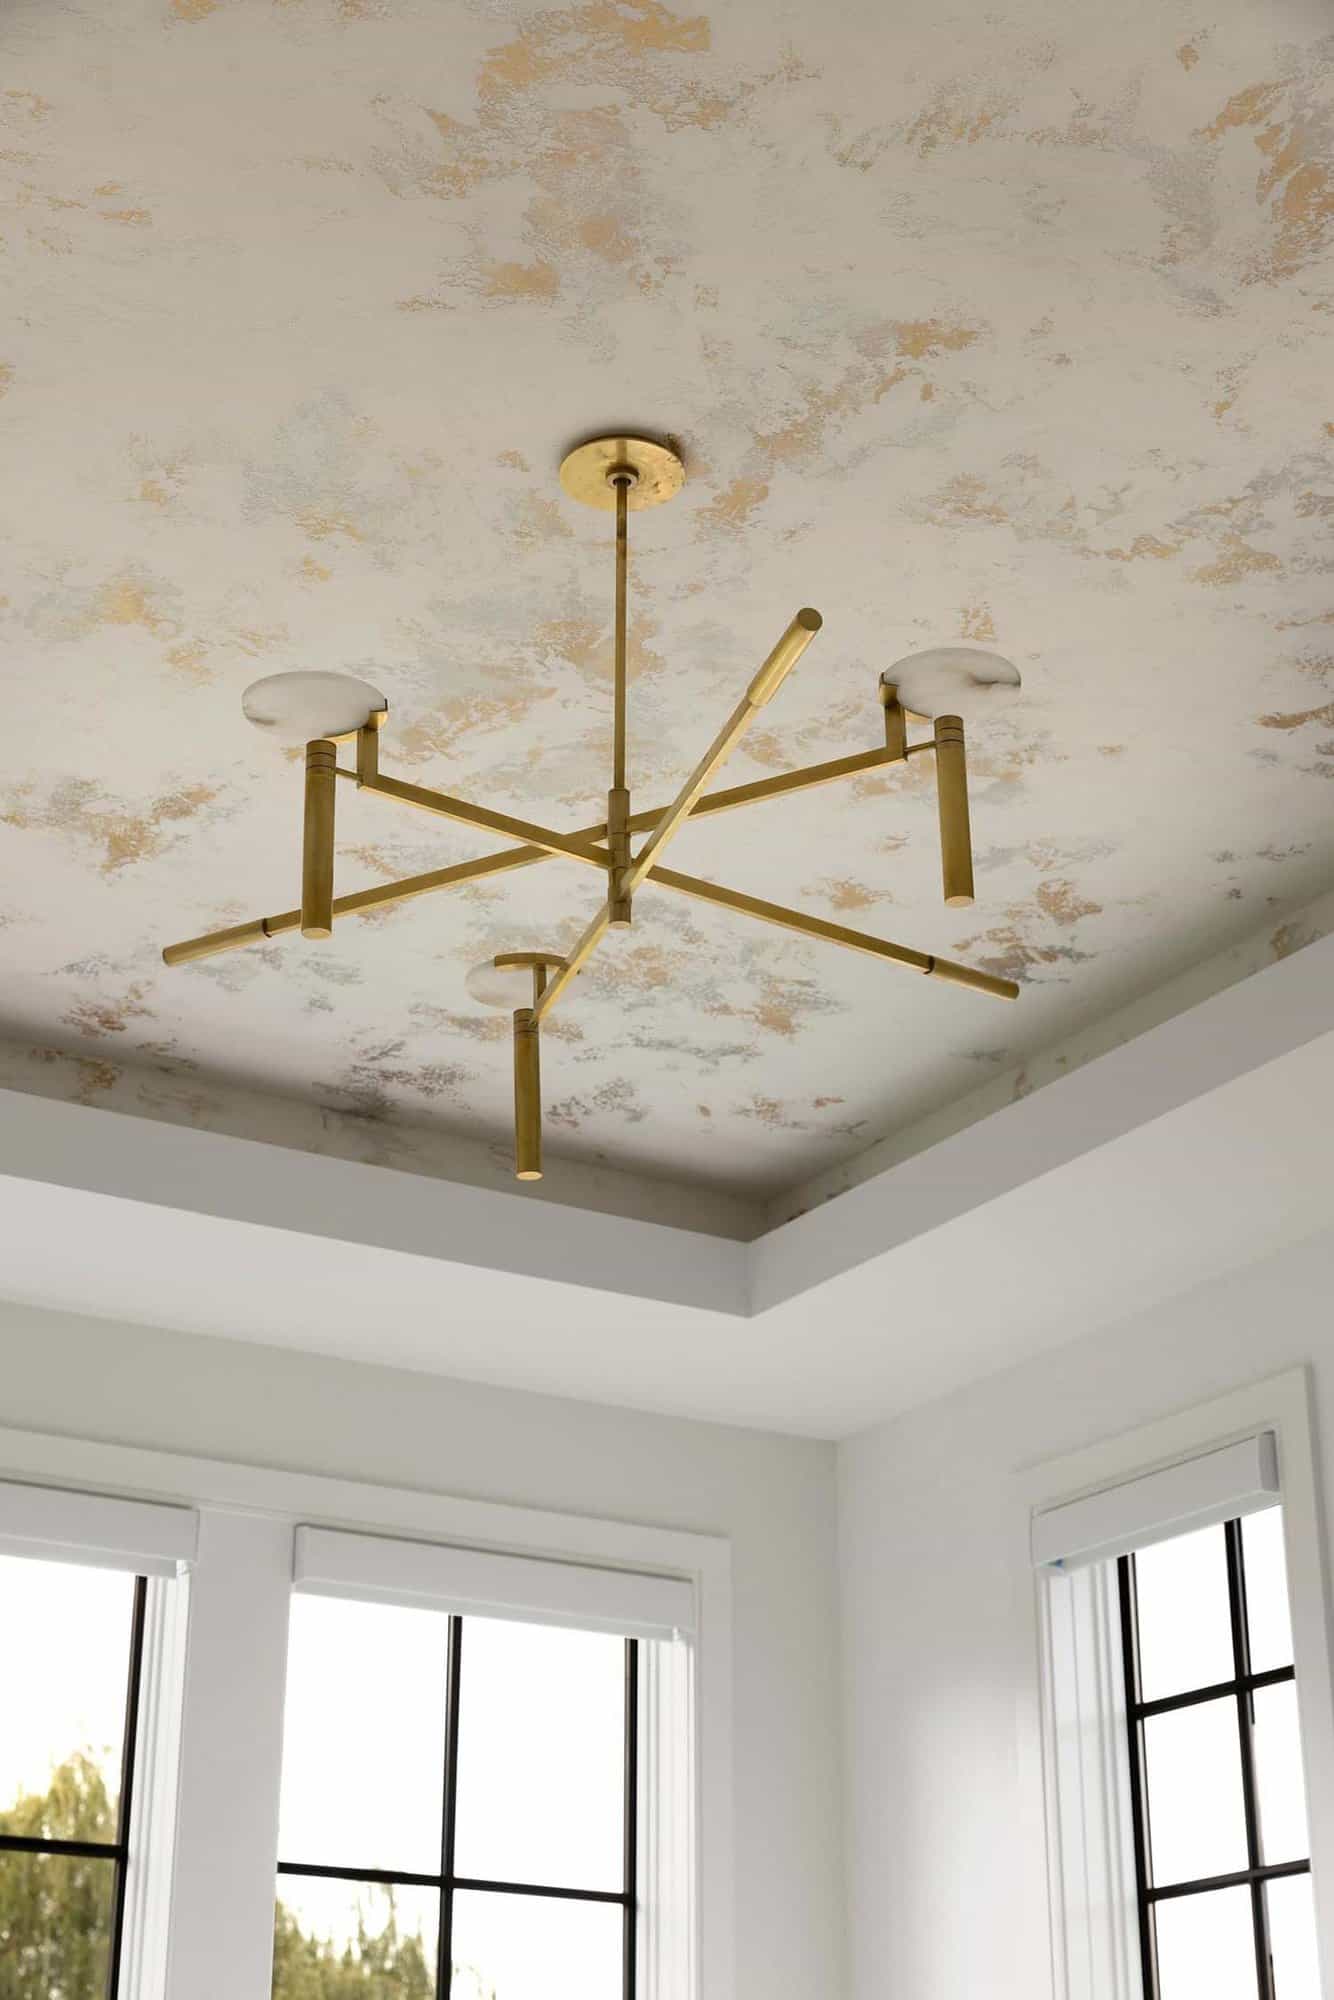 transitional-style-bedroom-ceiling-light-fixture